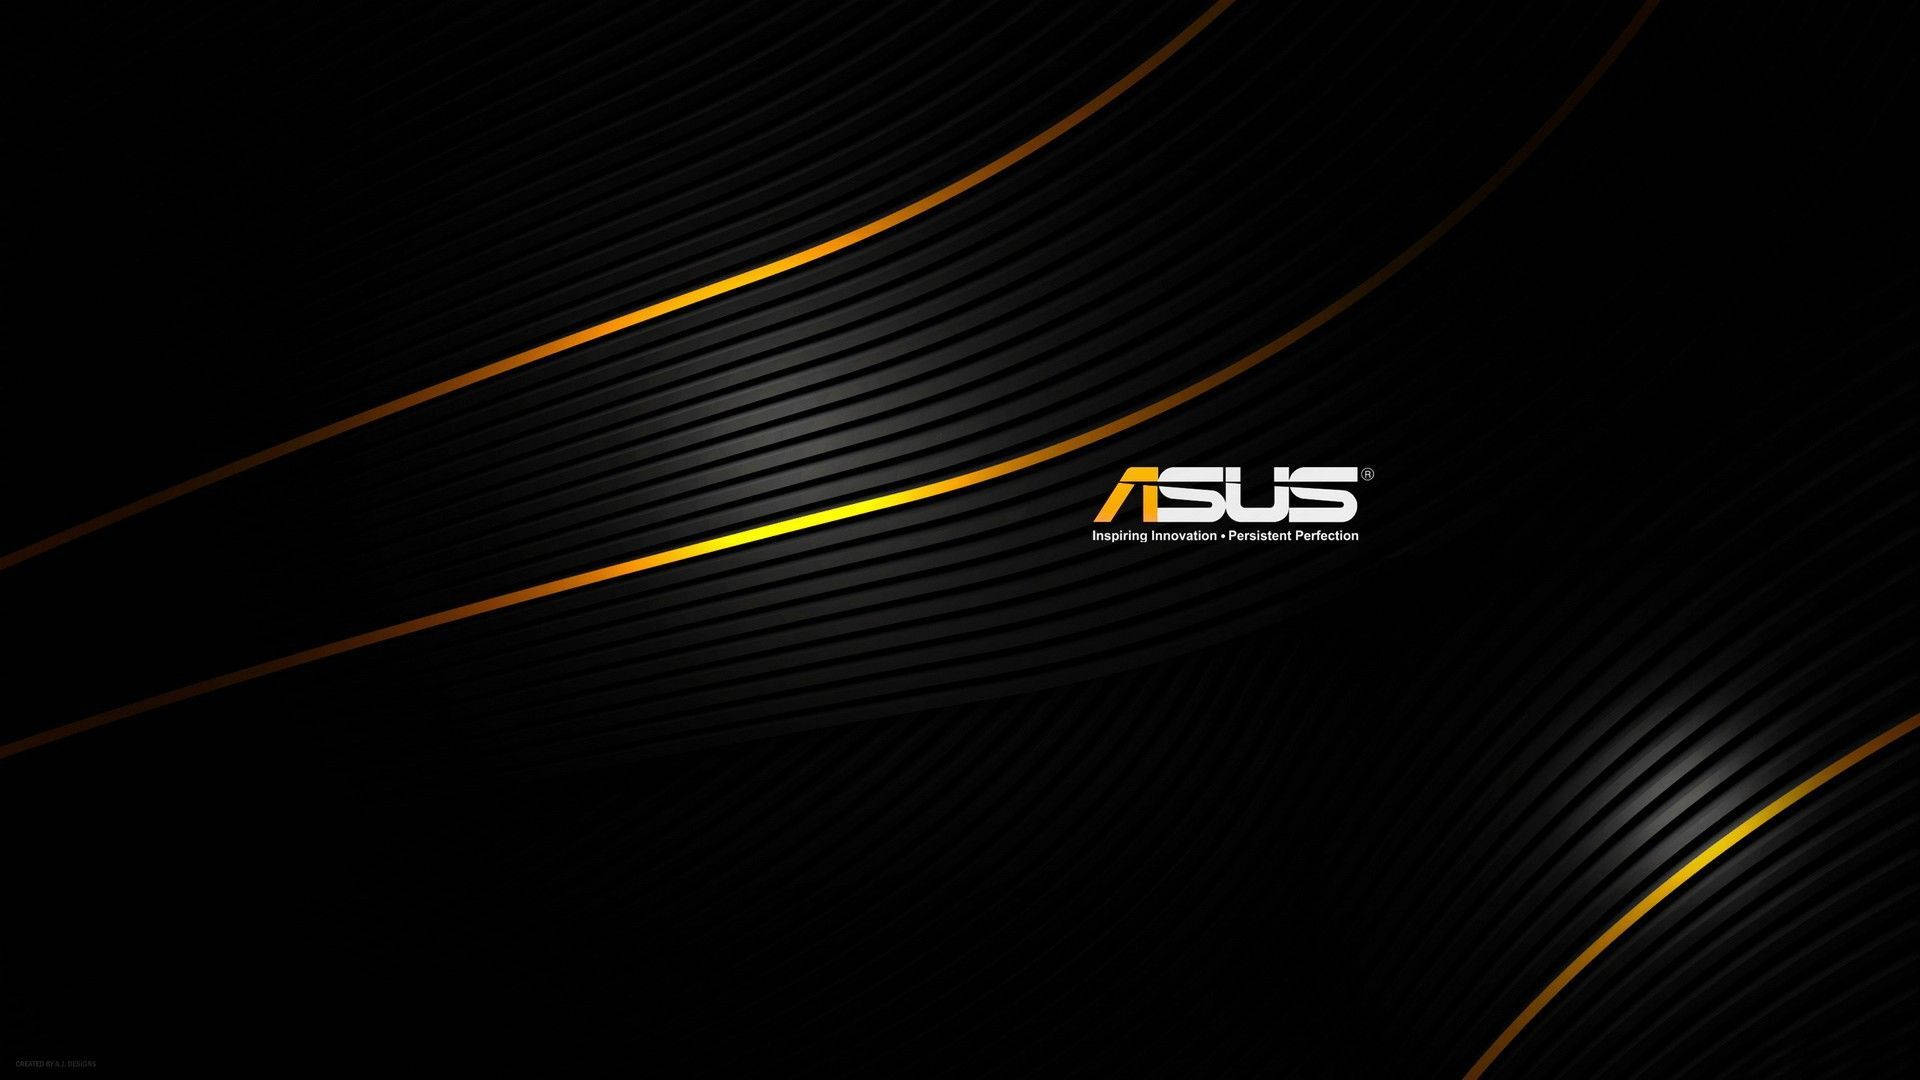 Summon Your Inner Power with the Asus NF106SA Wallpaper